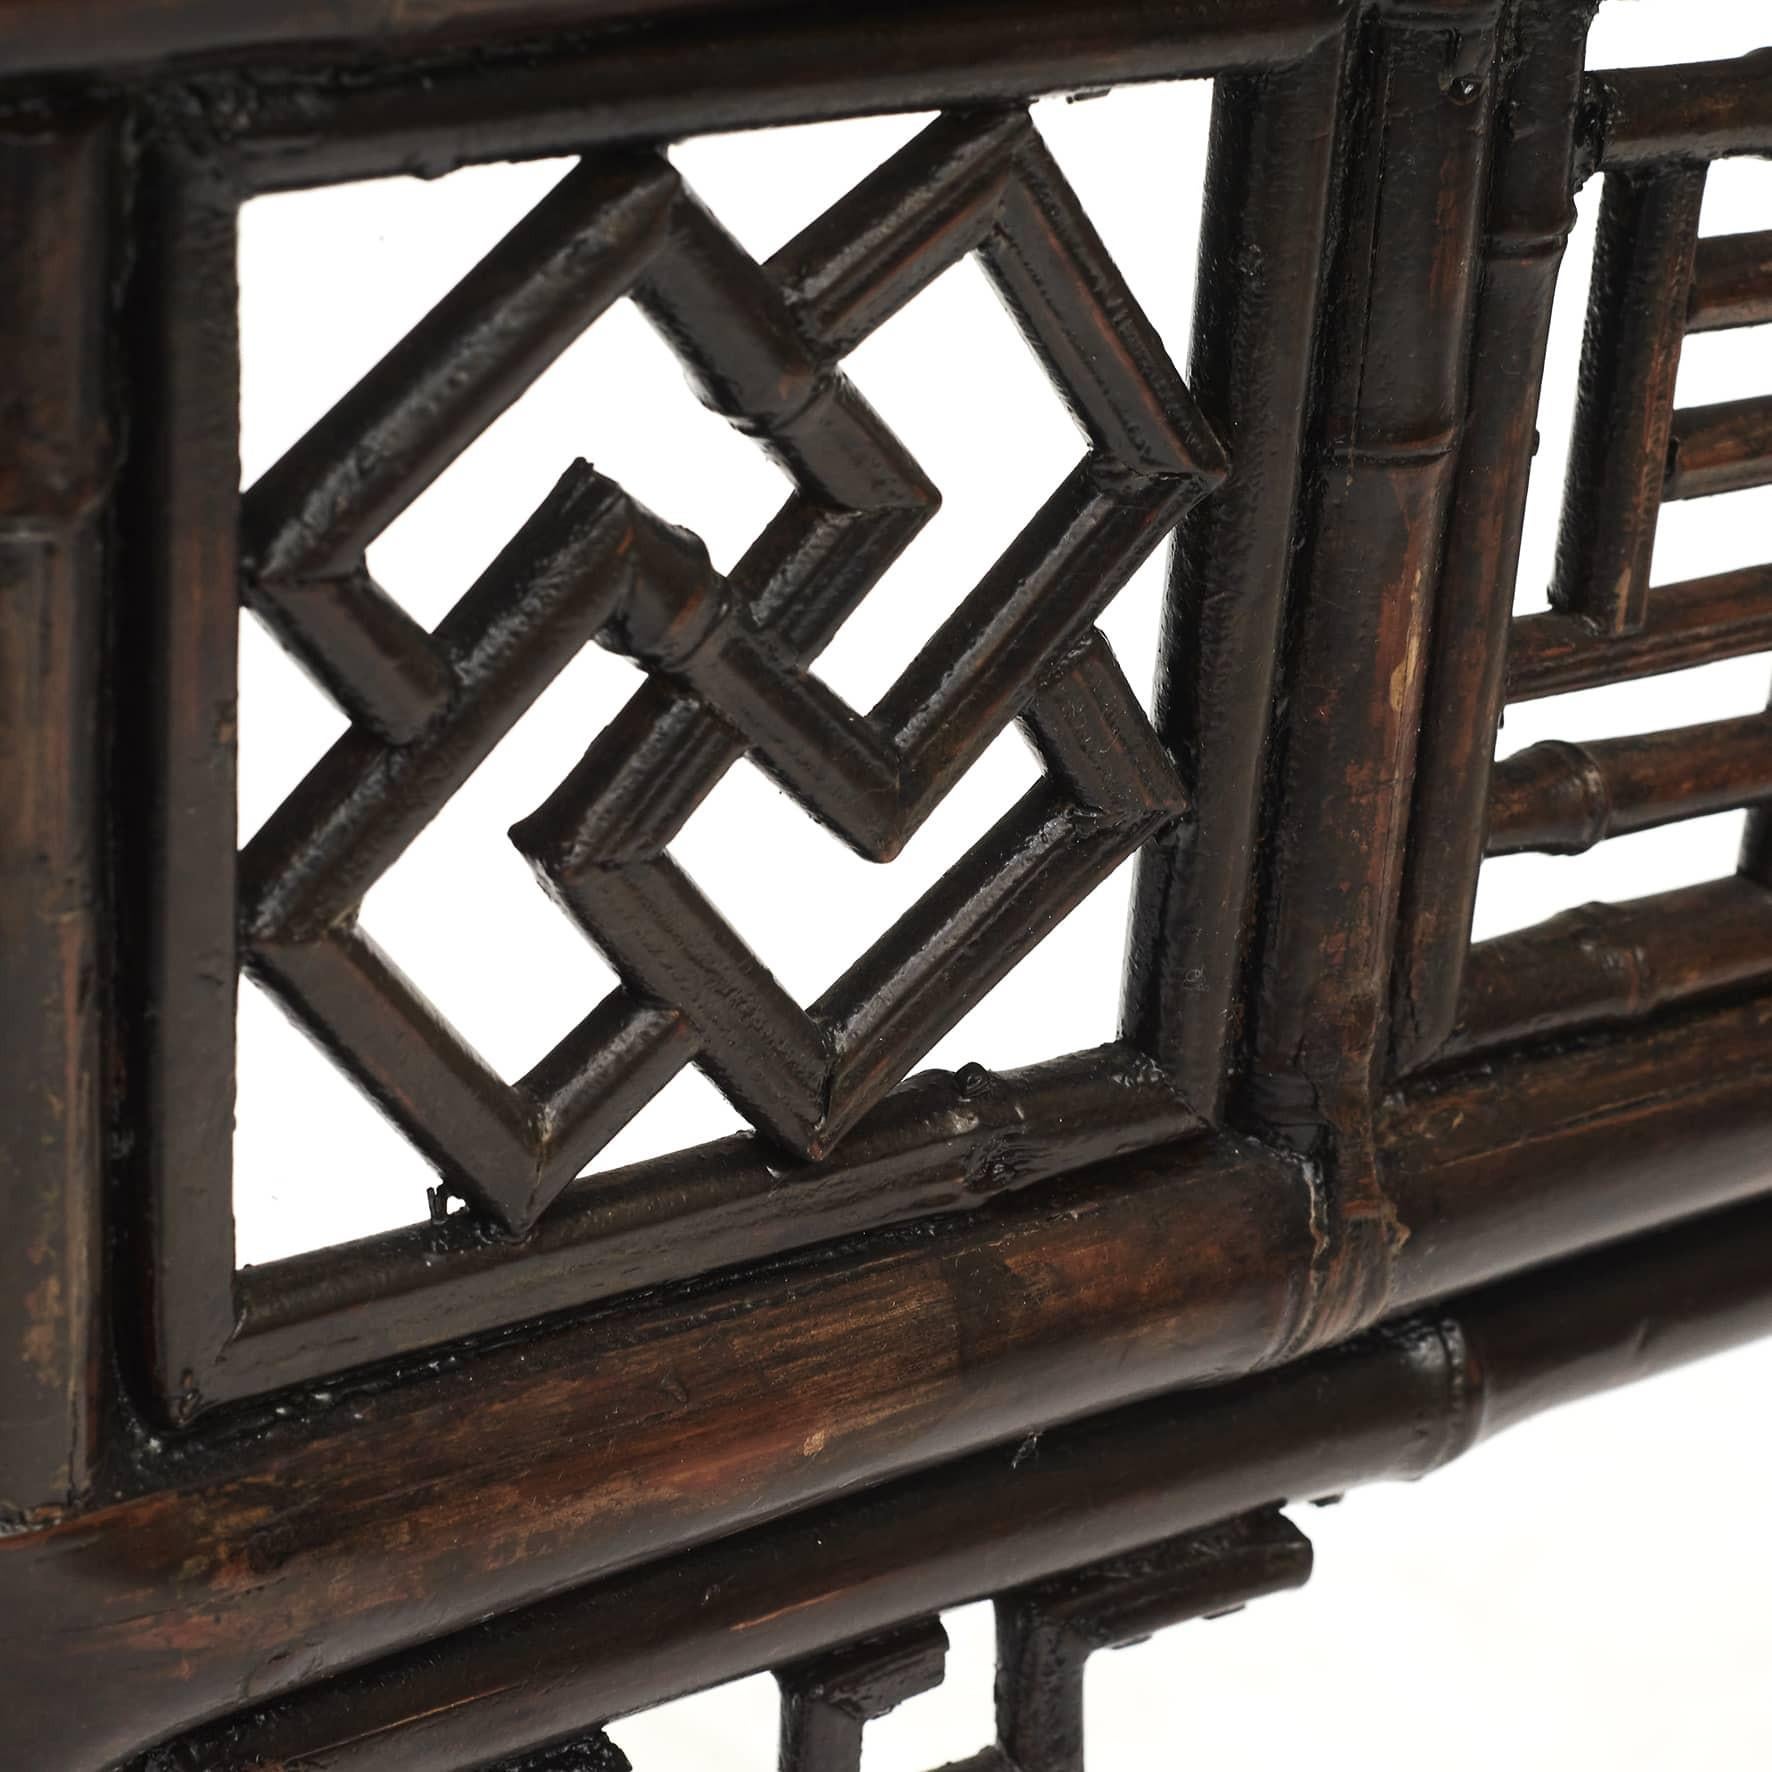 Lacquered Rare Bamboo Alter / Console Table, 1800 - 1840